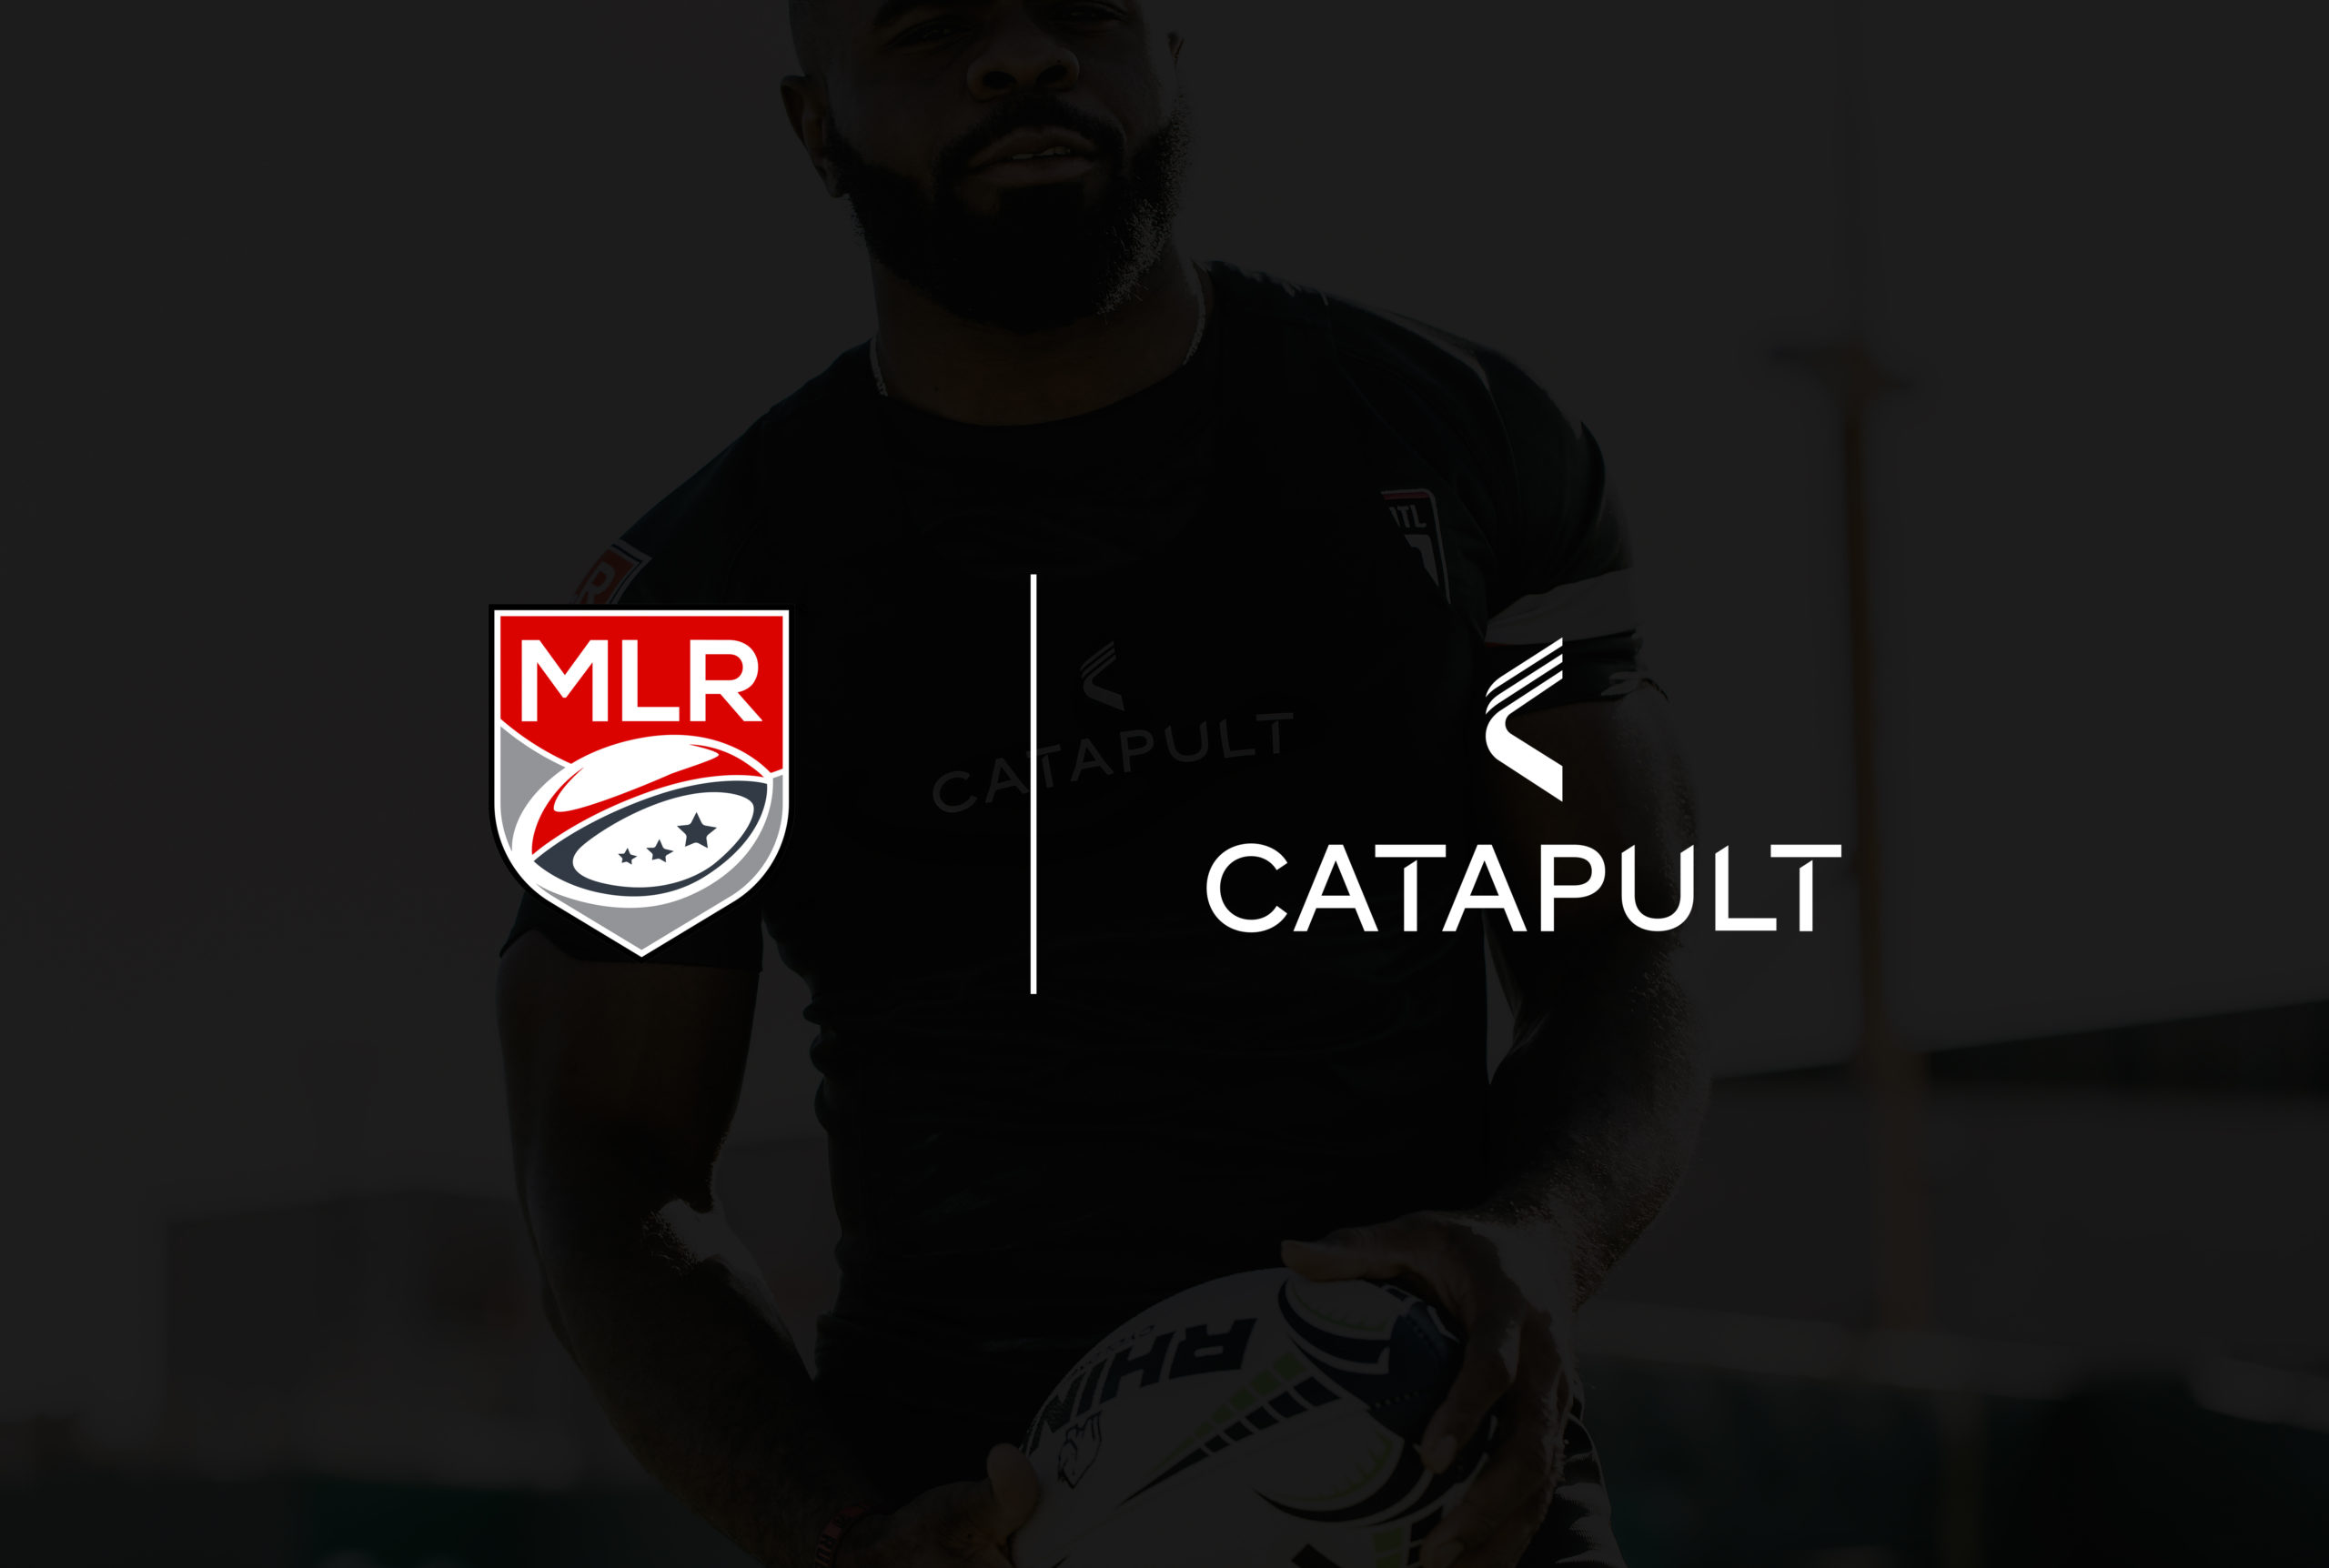 Major League Rugby expands GPS capabilities with Catapult partnership